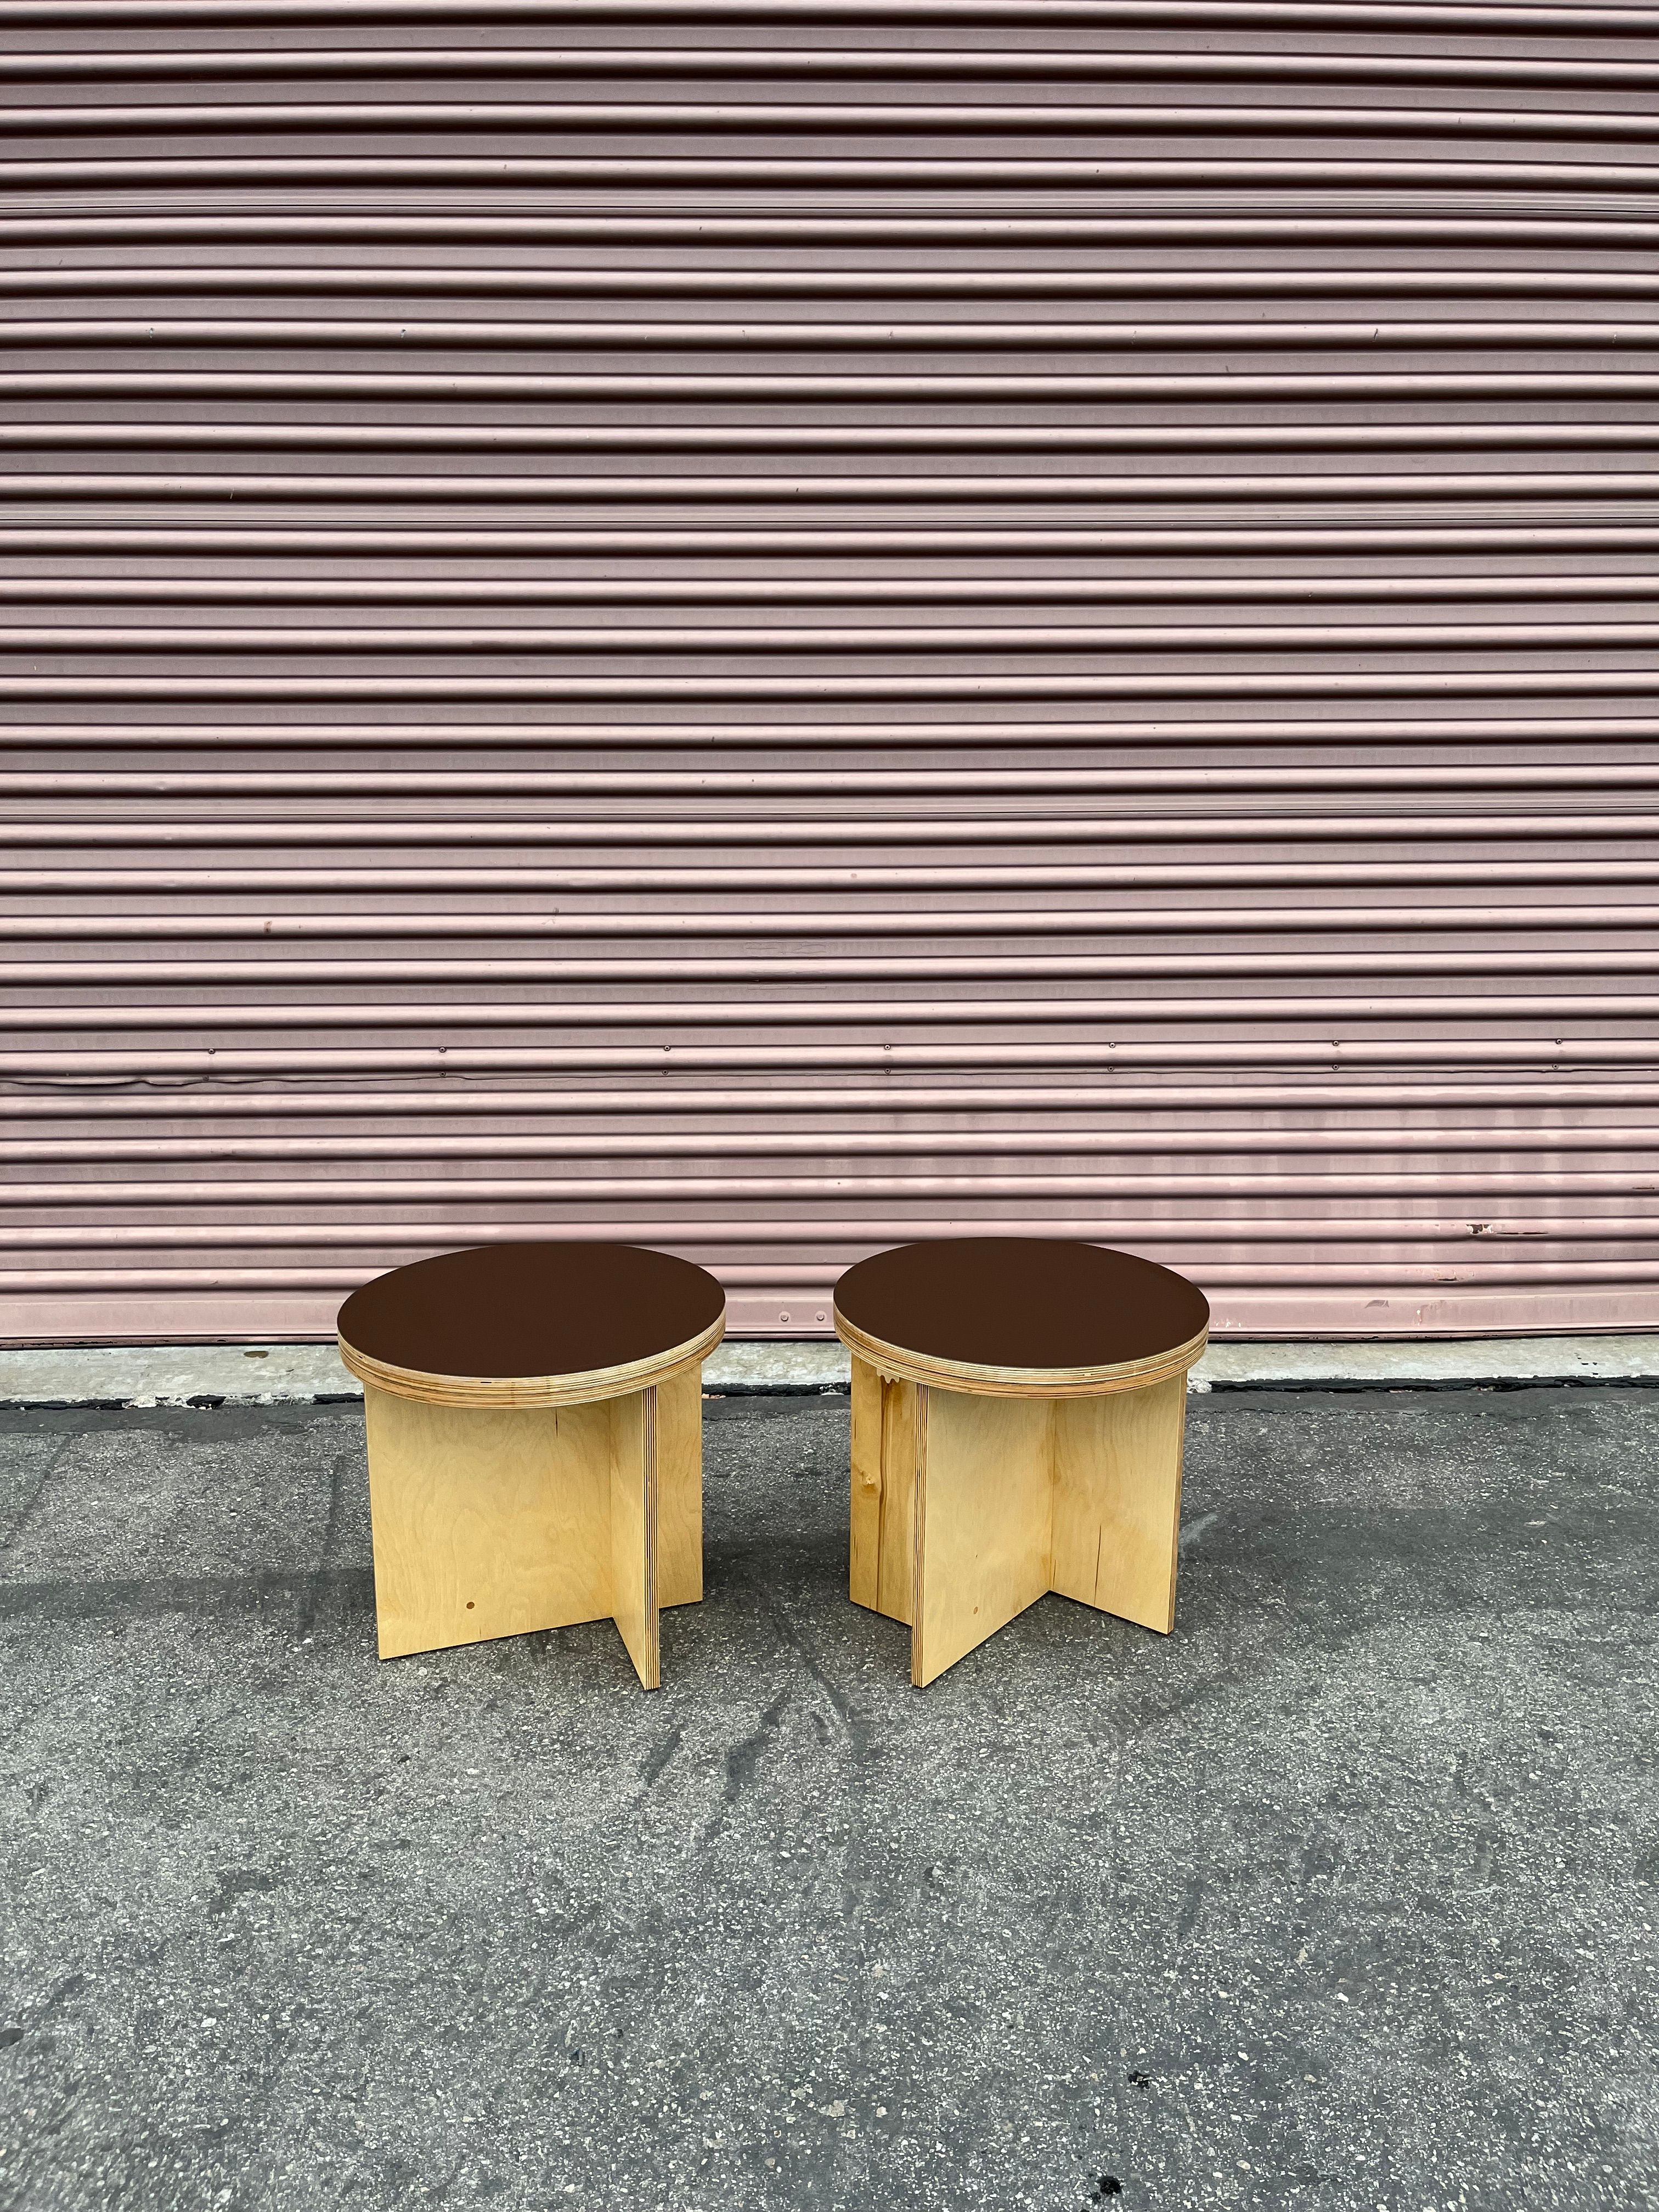  Round Offset Stools - Brown product image 5